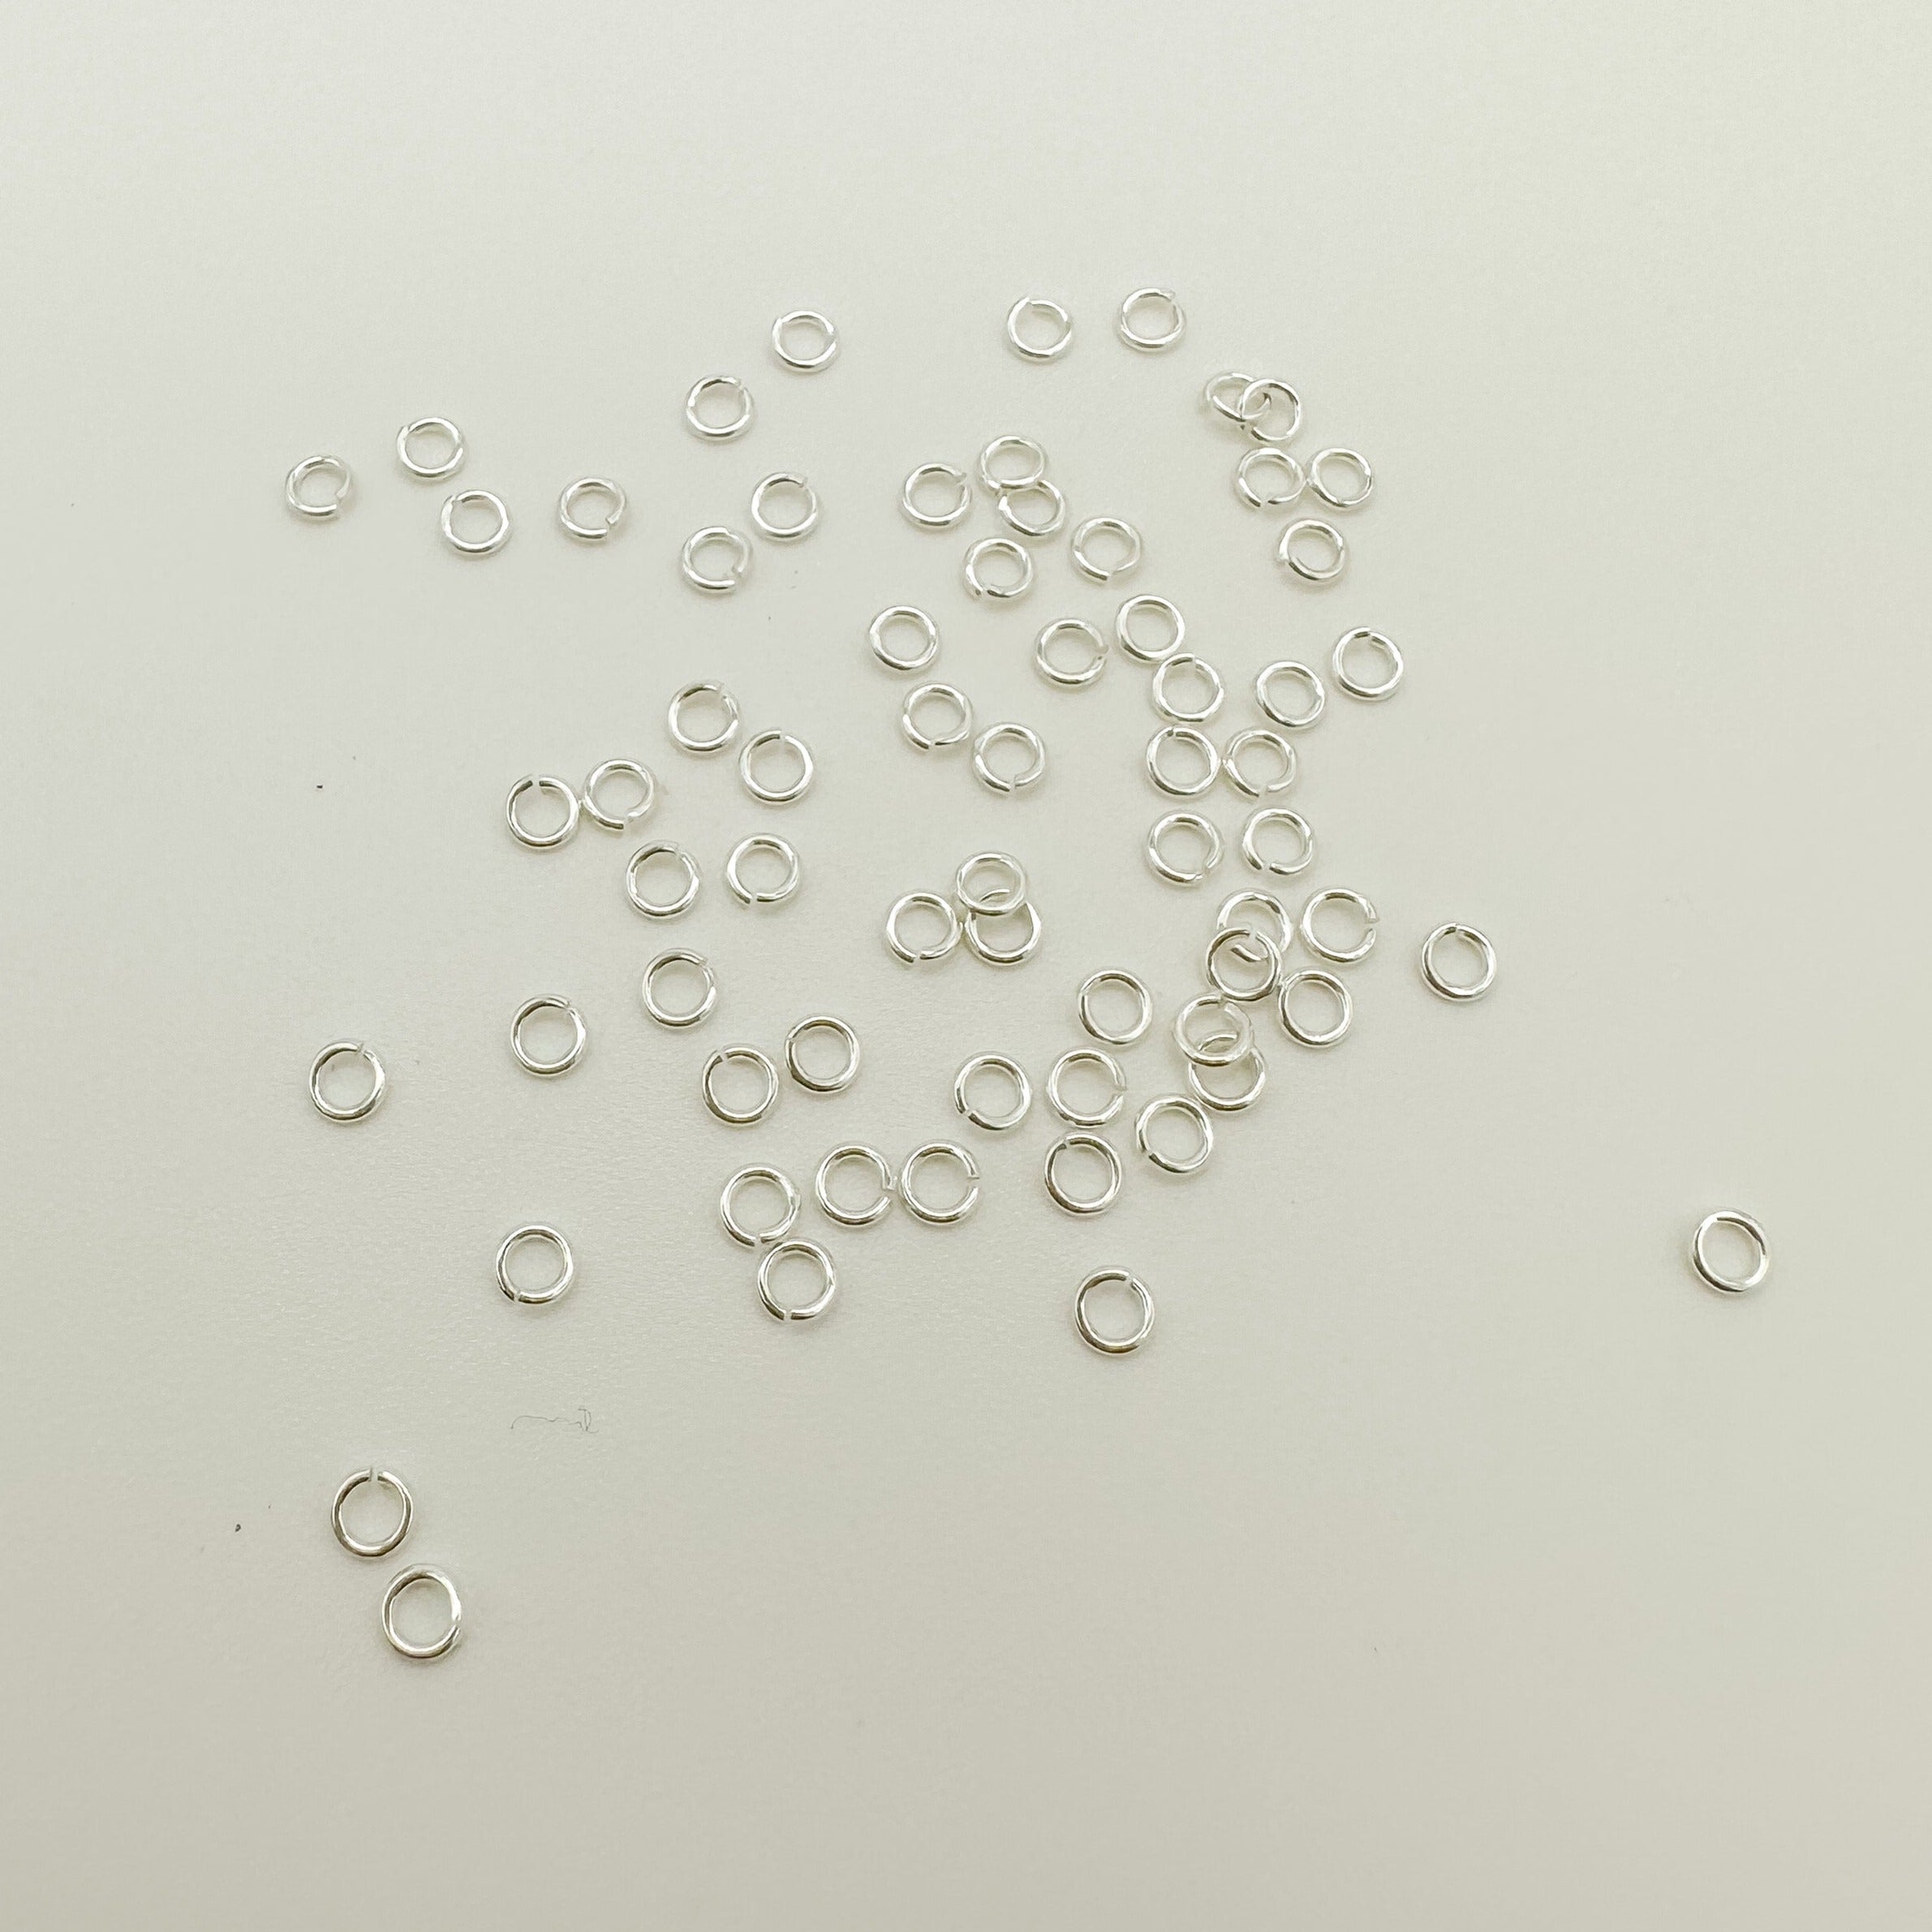 2.5mm 24g gold-filled jump rings